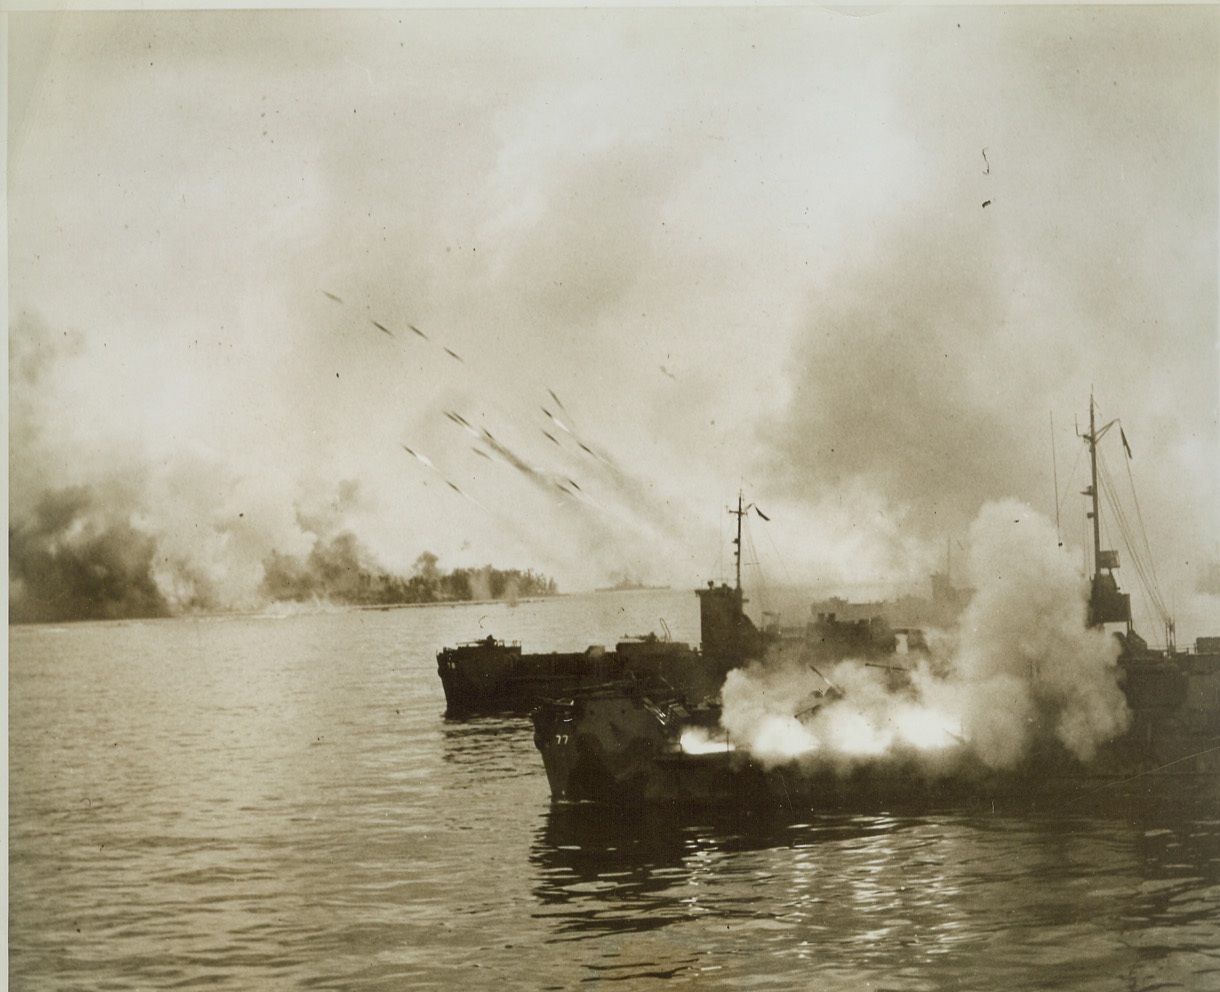 Marine Landings Heralded by Rockets, 9/26/1944. PELELIU IS. -- In the first pictures released of the new rocket weapons, landing craft of the Pacific Fleet direct rocket barrages against the beaches at Peleliu before invading 1st Division Marines landed on the island. The beach can be seen in the background, engulfed with smoke from rocket hits. Credit (Official US Navy Photo from ACME);